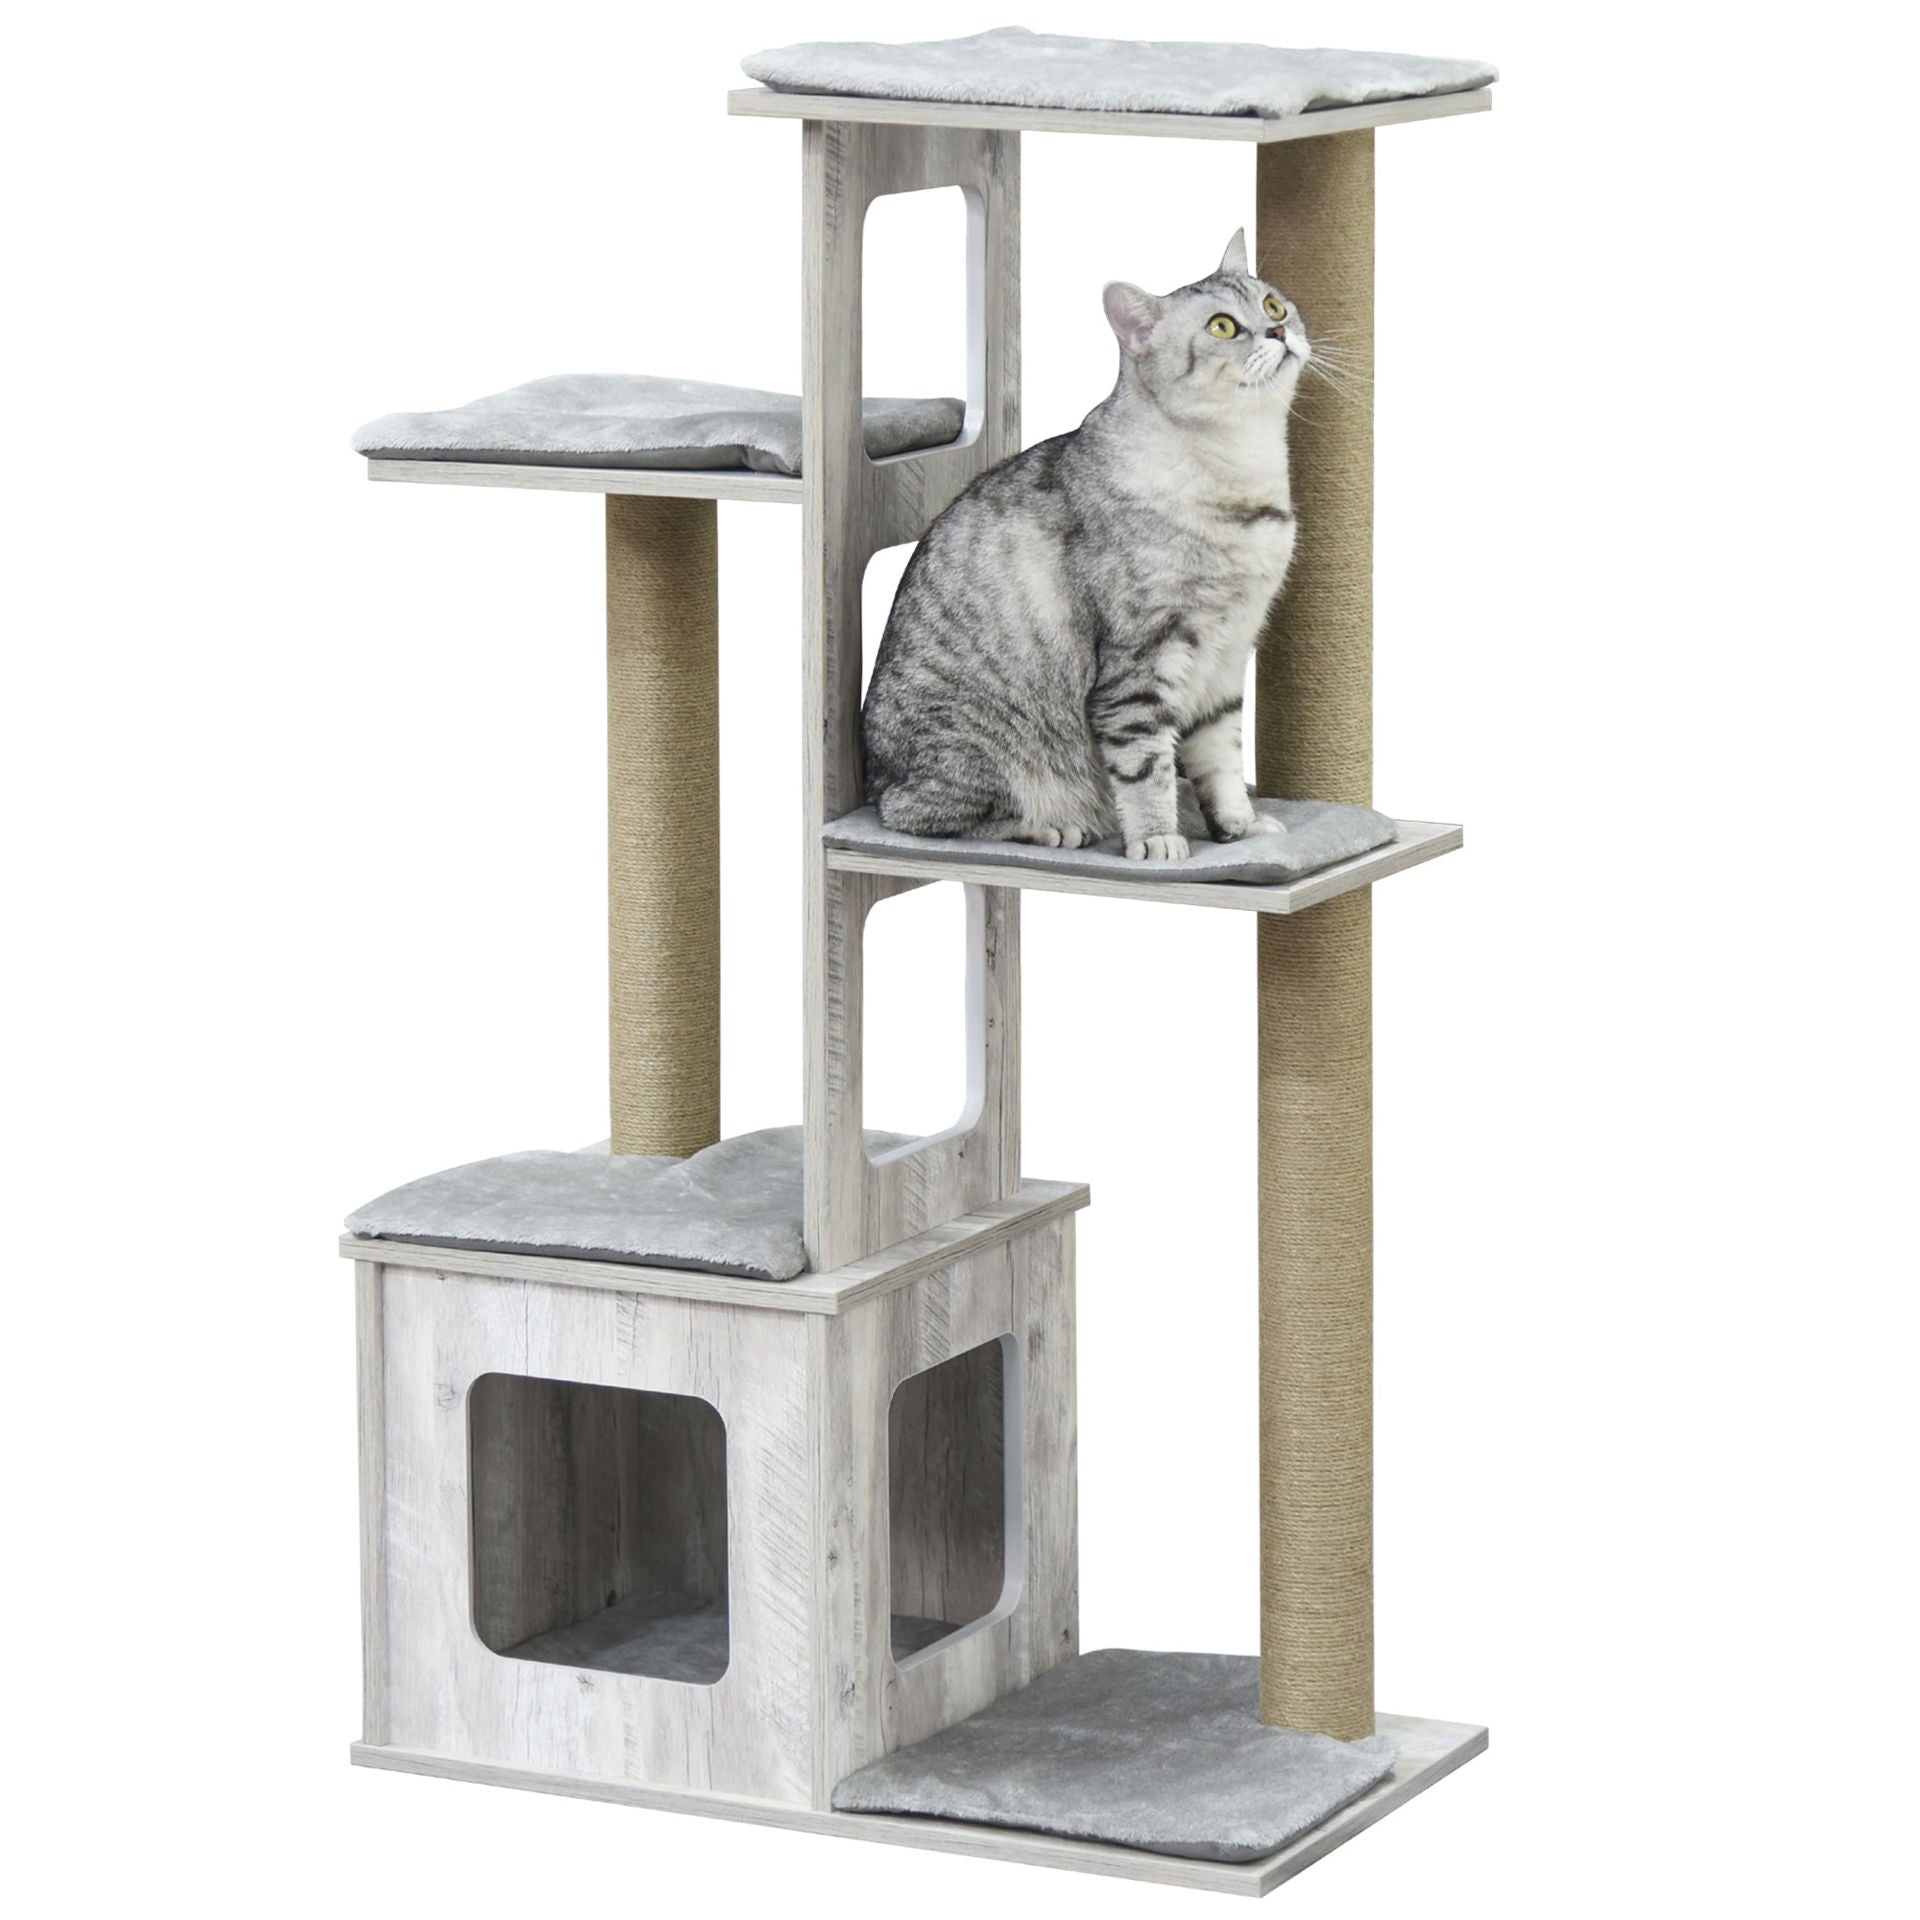 Nancy's Old Bank cat scratching post with cat house, cat furniture with multi-level cat activity center